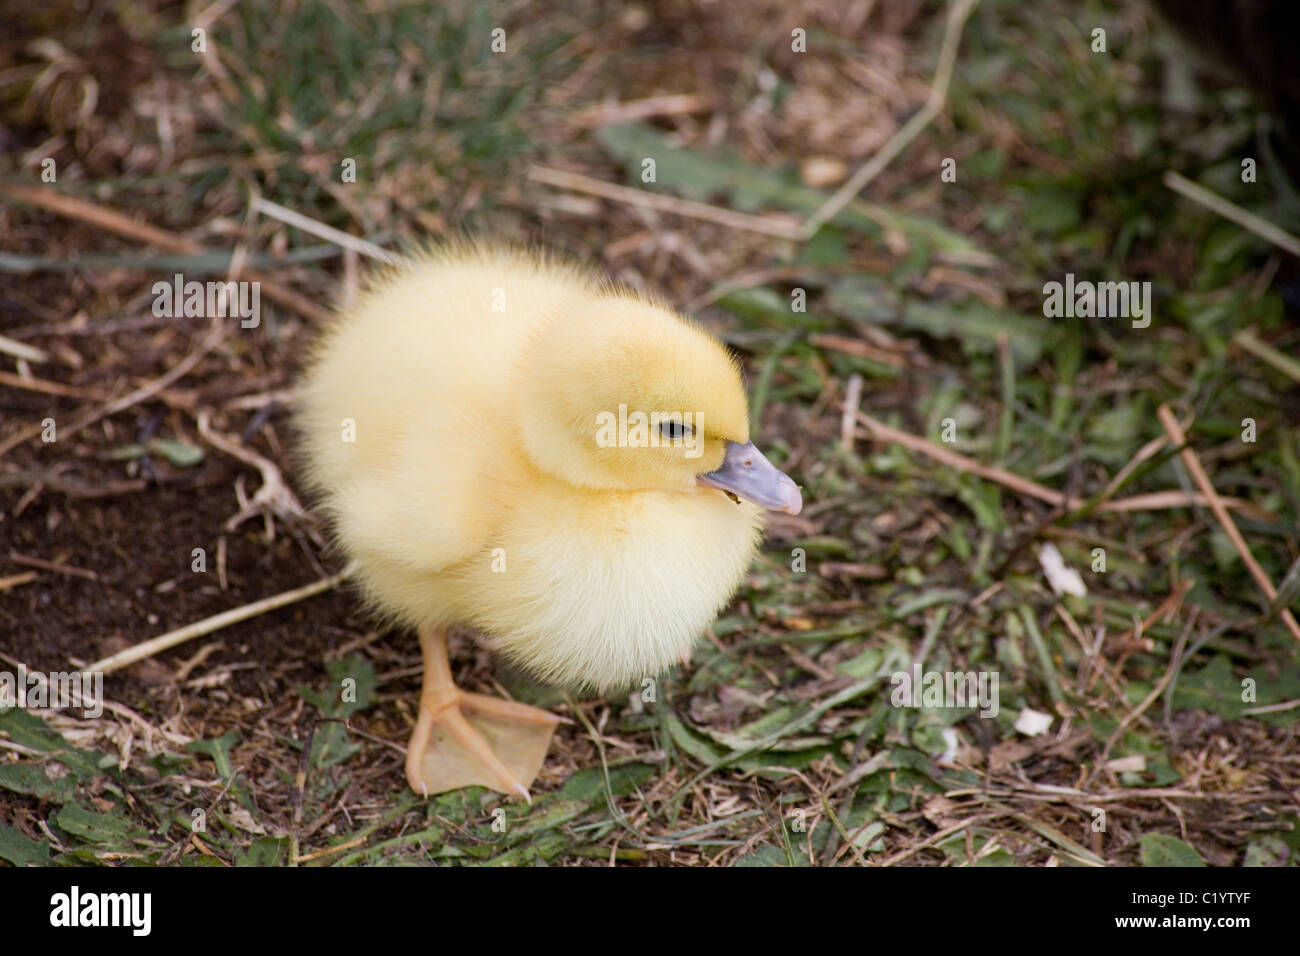 a duckling close up shot Stock Photo